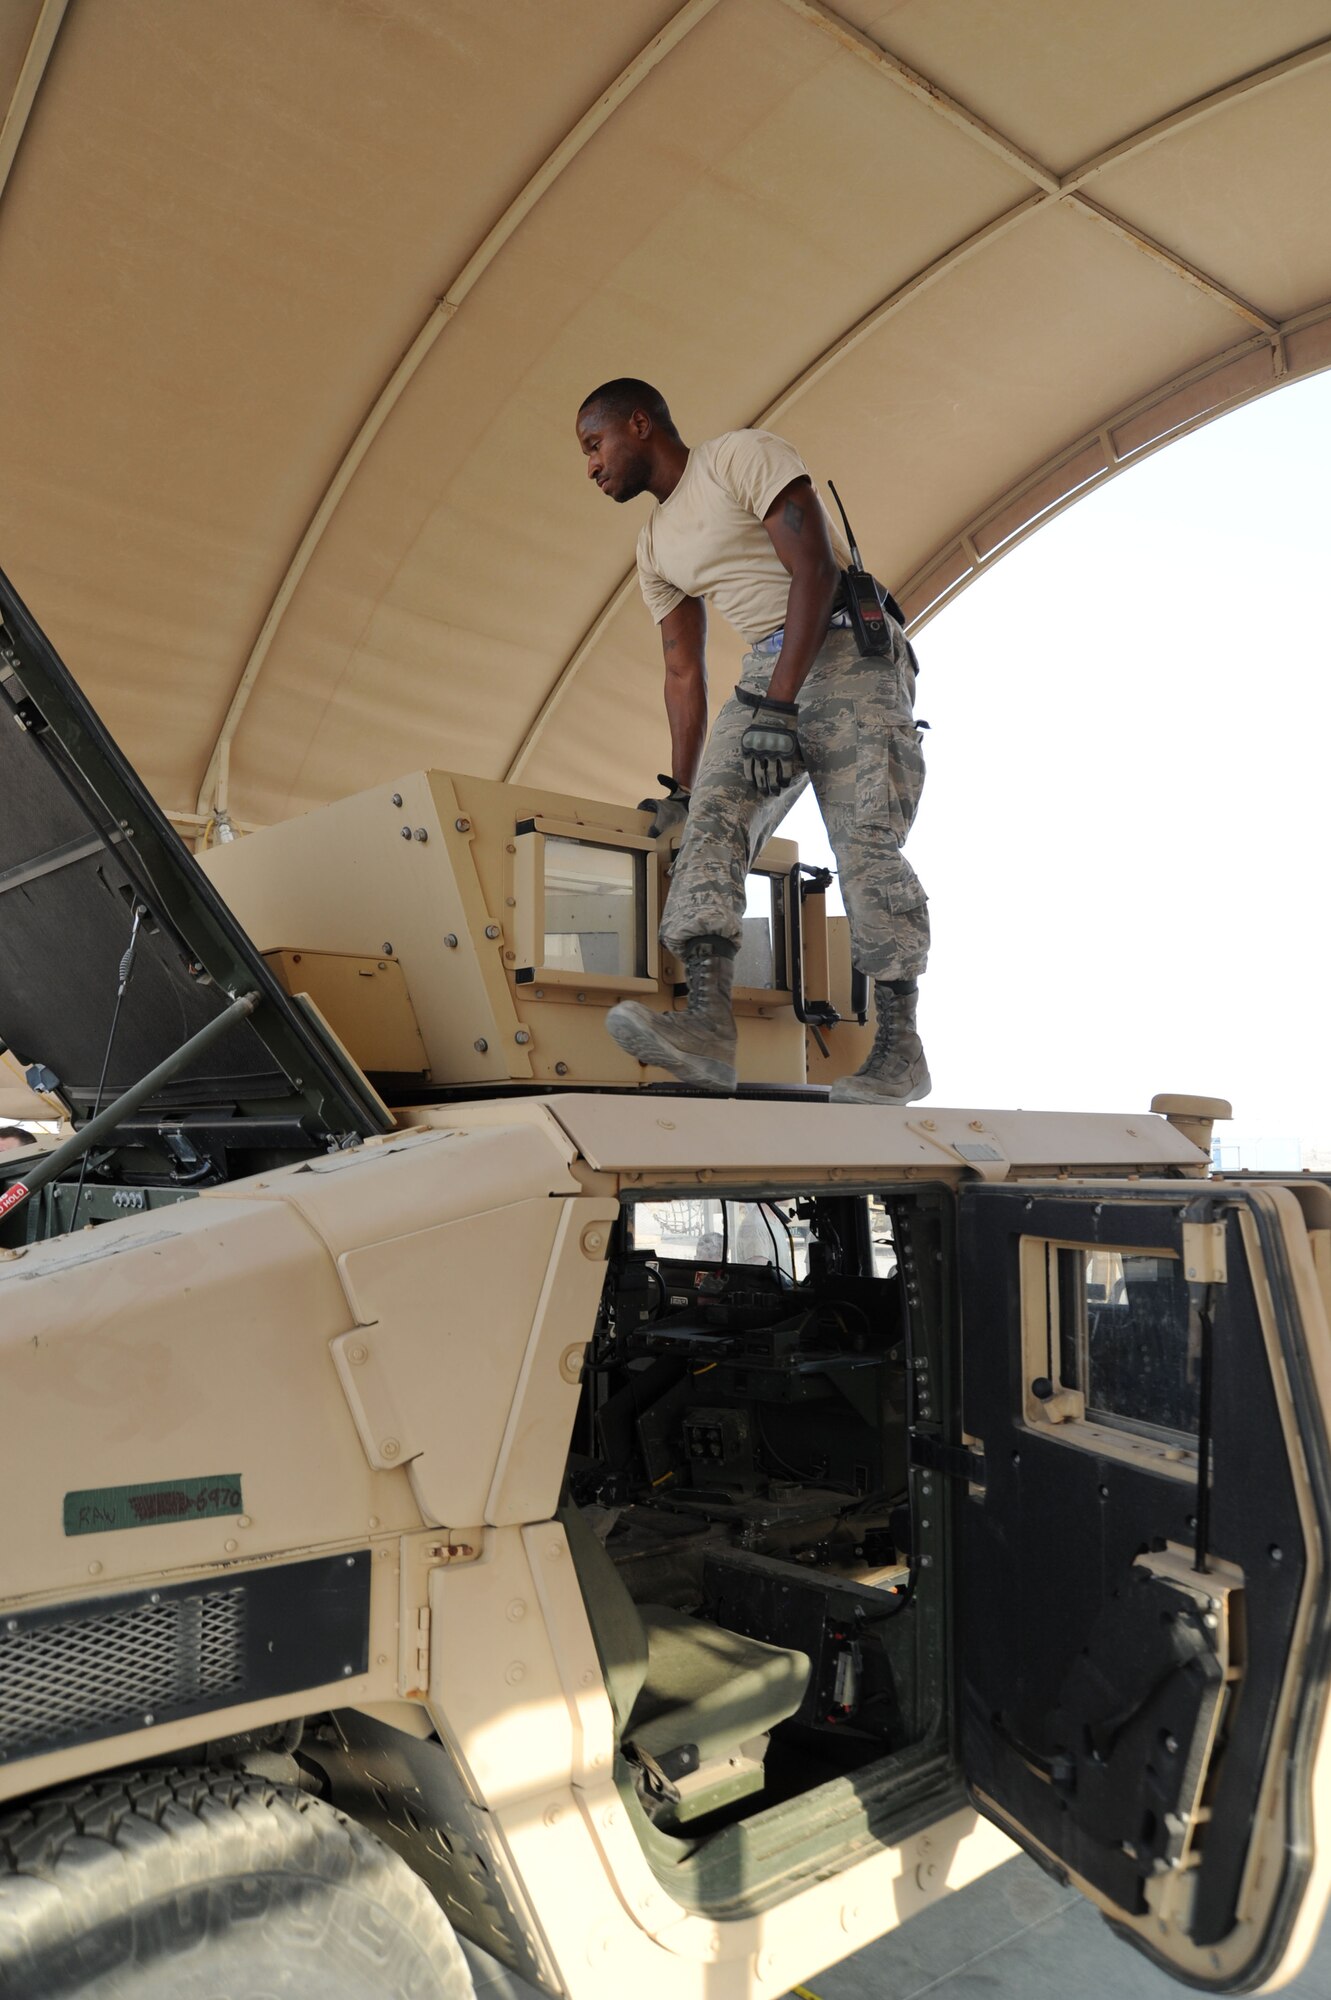 Senior Airman Daniel Gardner, 386th Expeditionary Logistics Readiness Squadron special handling technician, inspects a Humvee July, 21, 2016 at an undisclosed location in Southwest Asia. The special handling section of the 386 ELRS aerial port flight is responsible for performing joint inspections, which allows everything that passes inspection to be gained into the port. (U.S. Air Force photo/Senior Airman Zachary Kee)